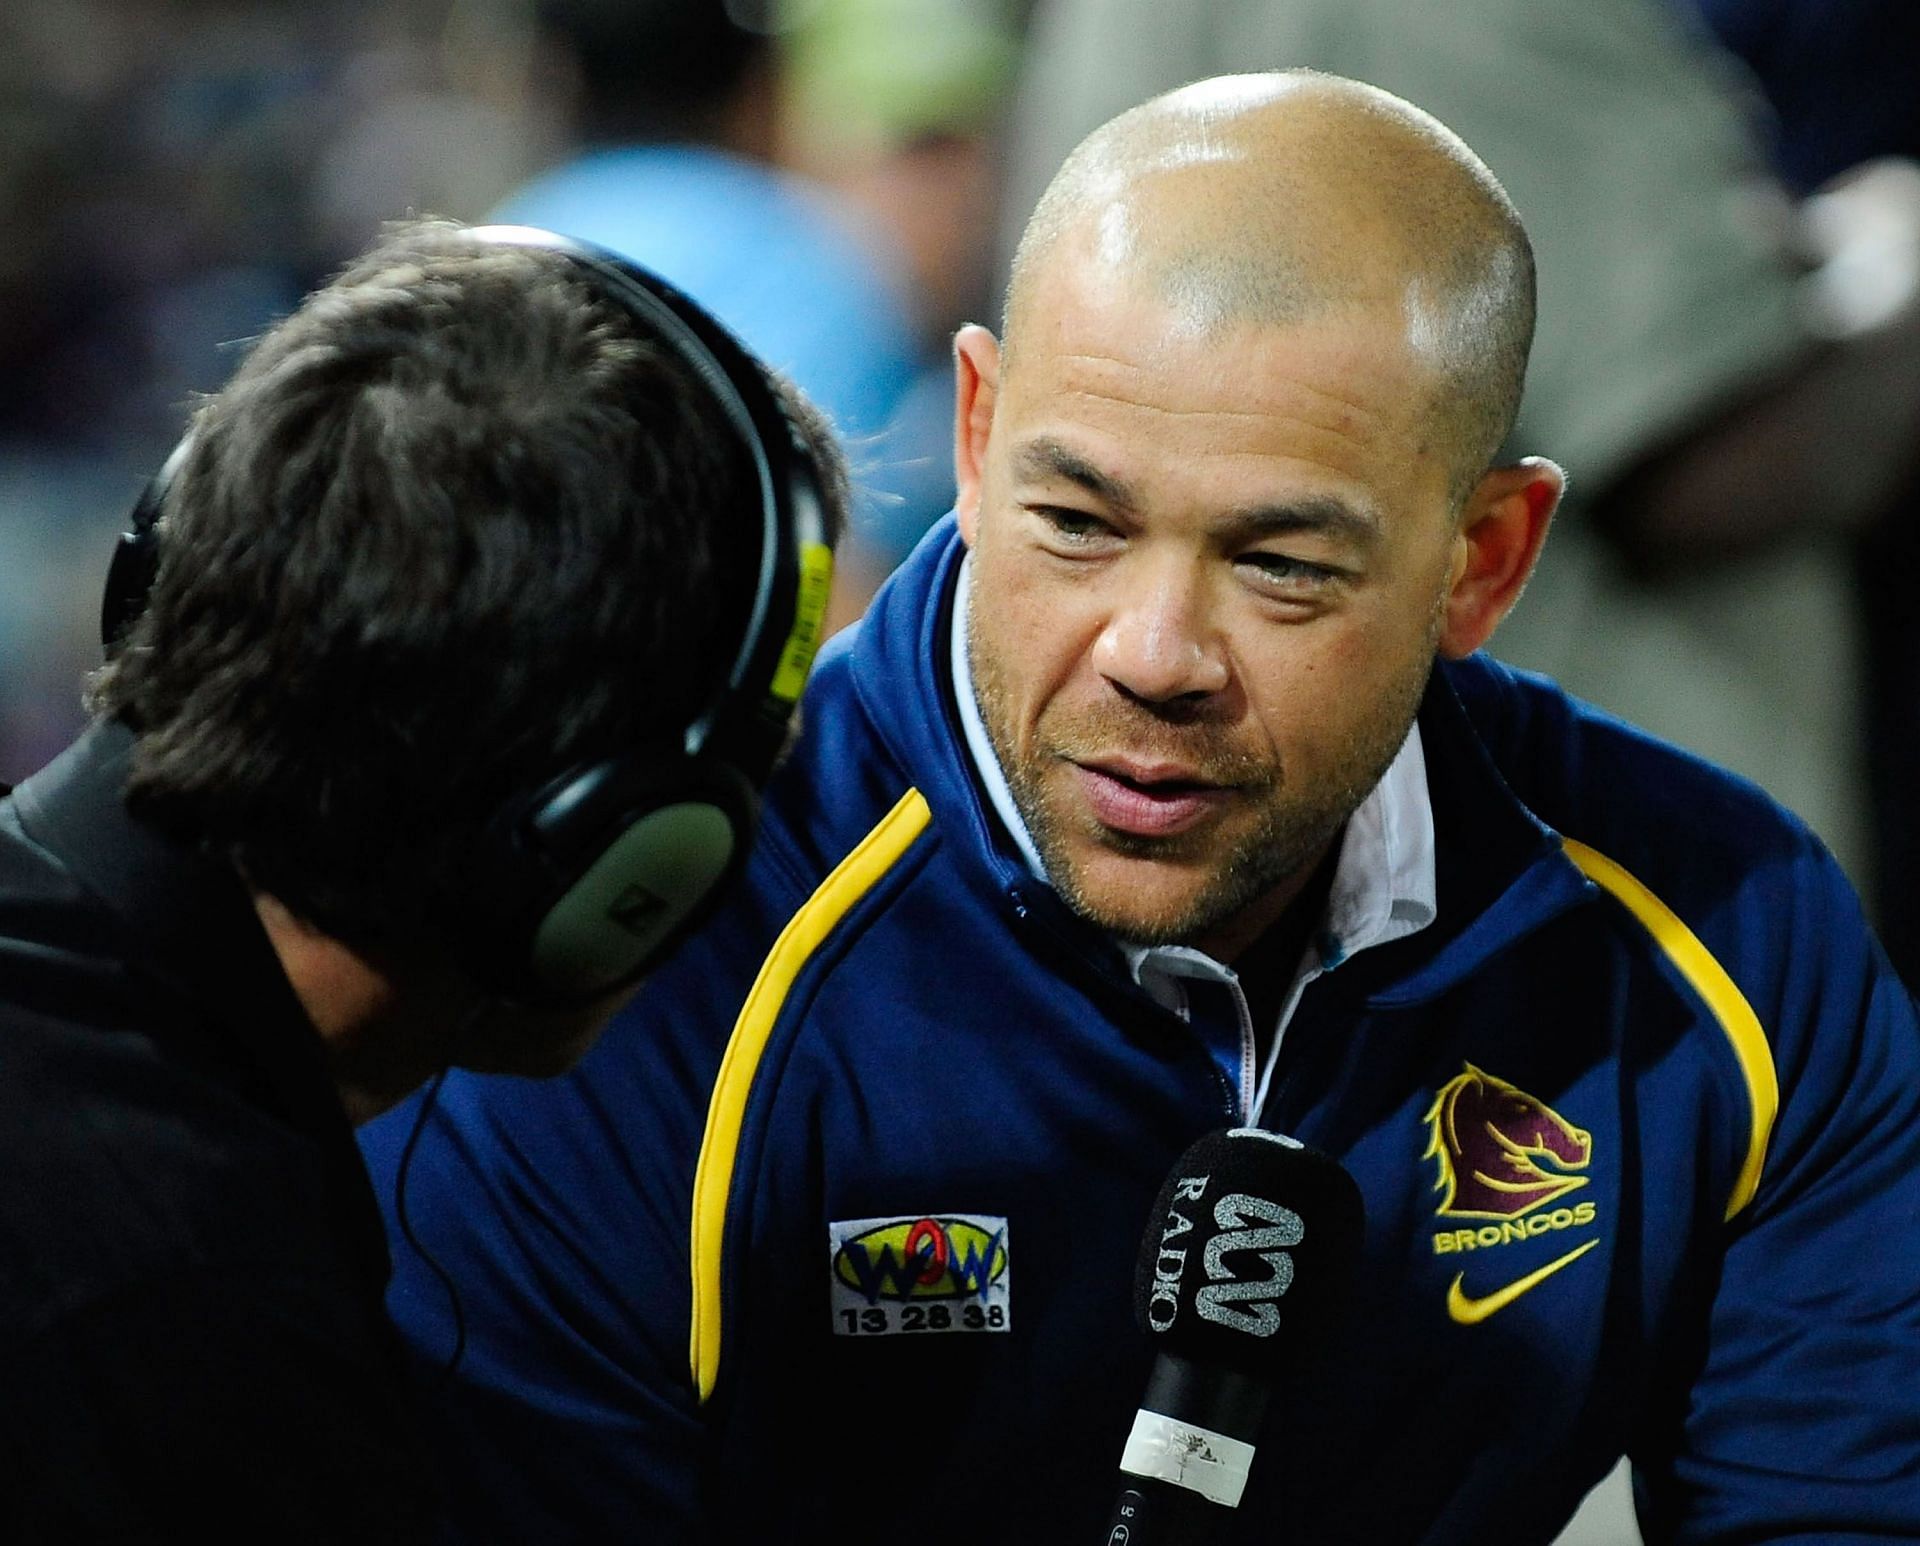 Former Australian cricketer Andrew Symonds. Pic: Getty Images